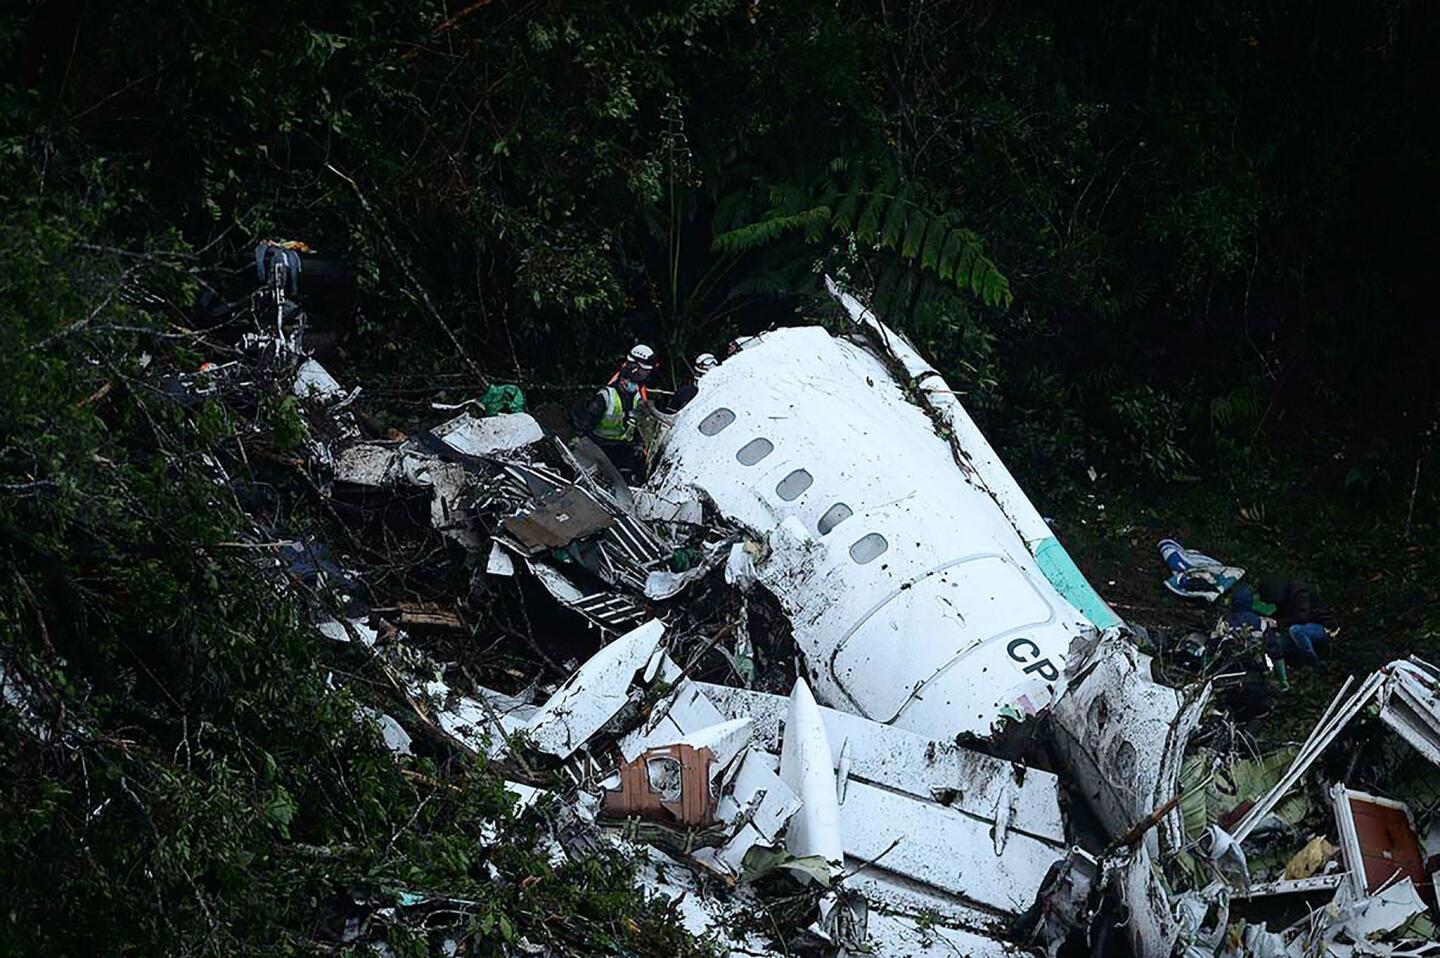 Rescuers search for survivors from the wreckage of the LAMIA airlines charter plane carrying members of the Chapecoense Real football team that crashed in the mountains of Colombia on Nov. 29, 2016.